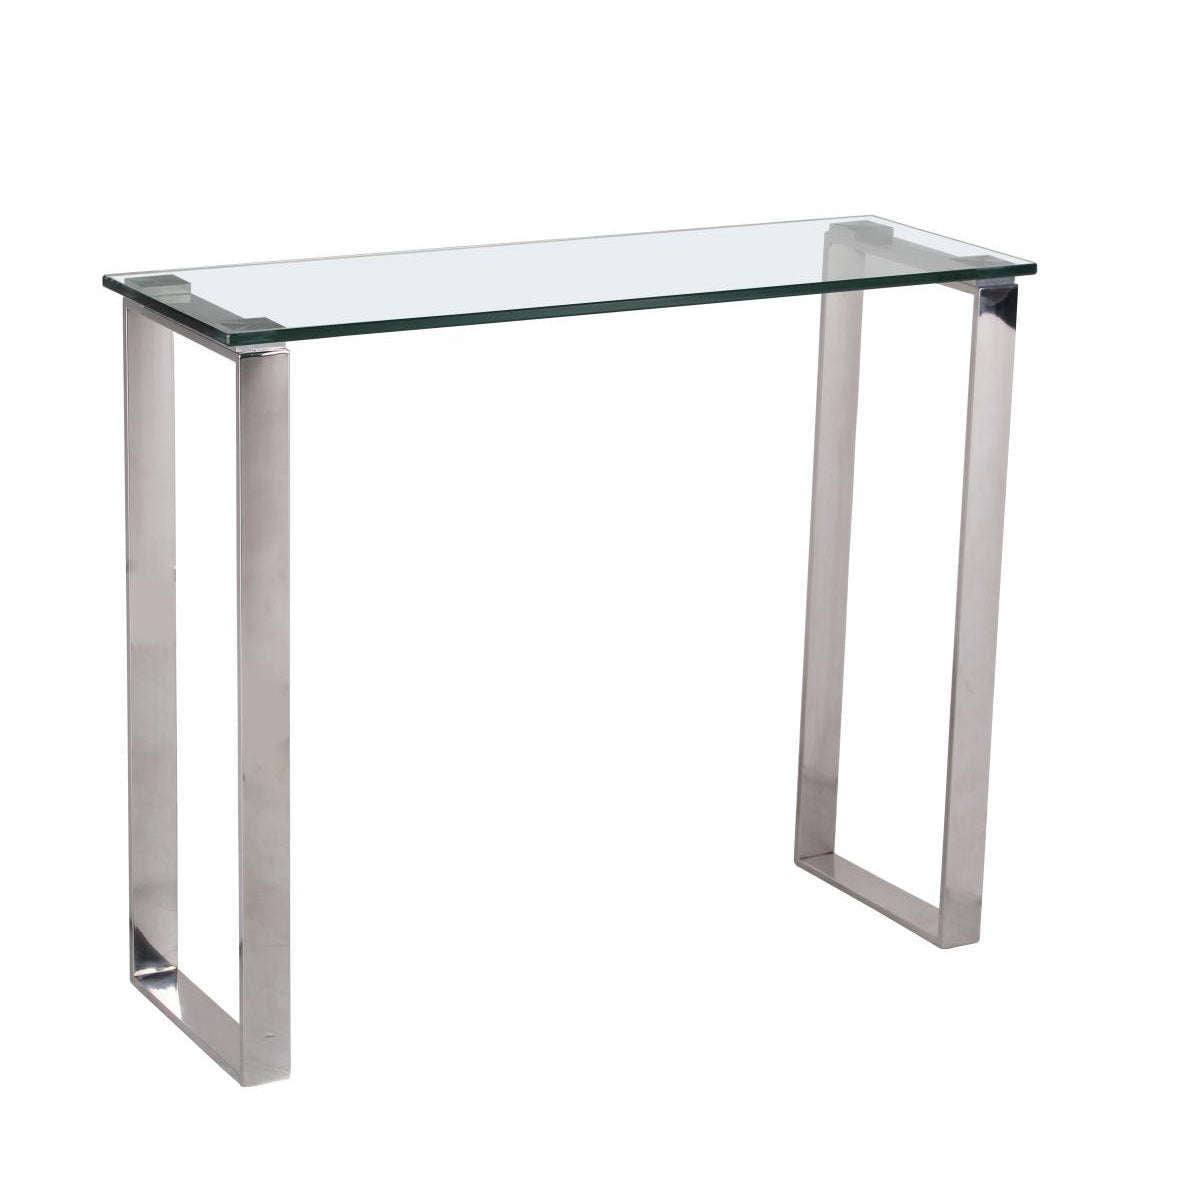 Ashpinoke:Carter Glass Console Table with Stainless Steel Legs,Console and Hall Tables,Heartlands Furniture